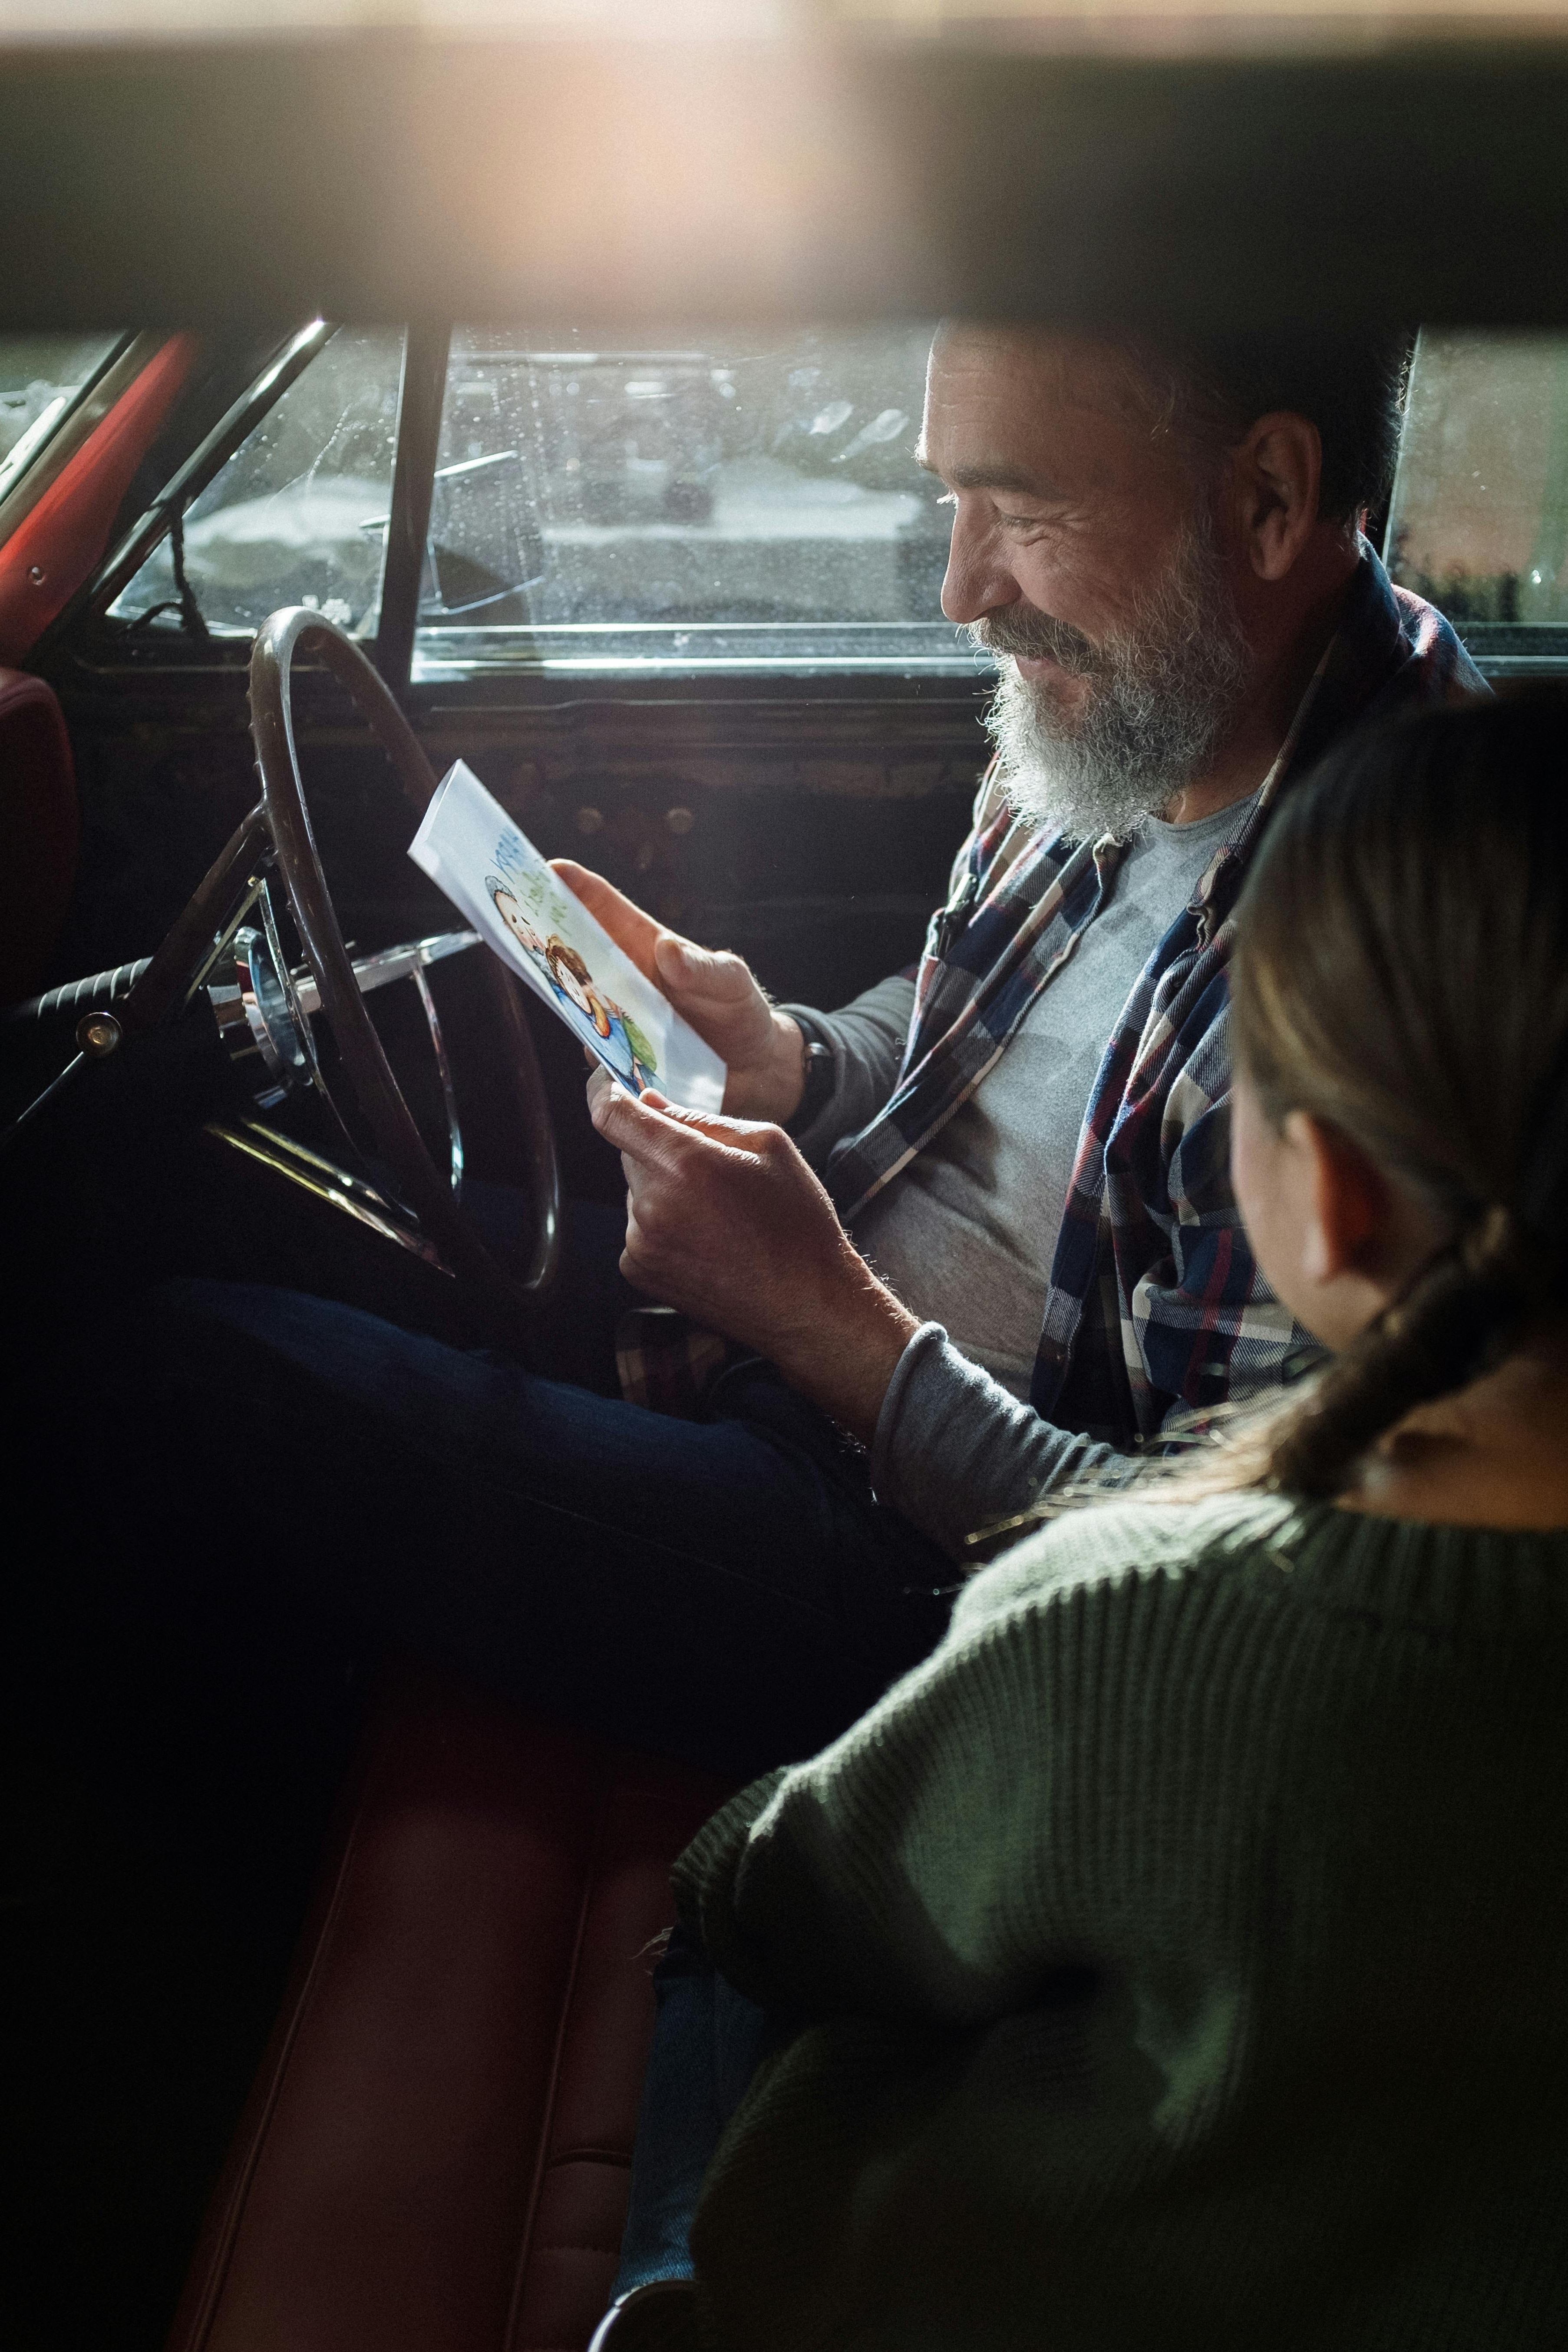 Man and daughter in car reading map